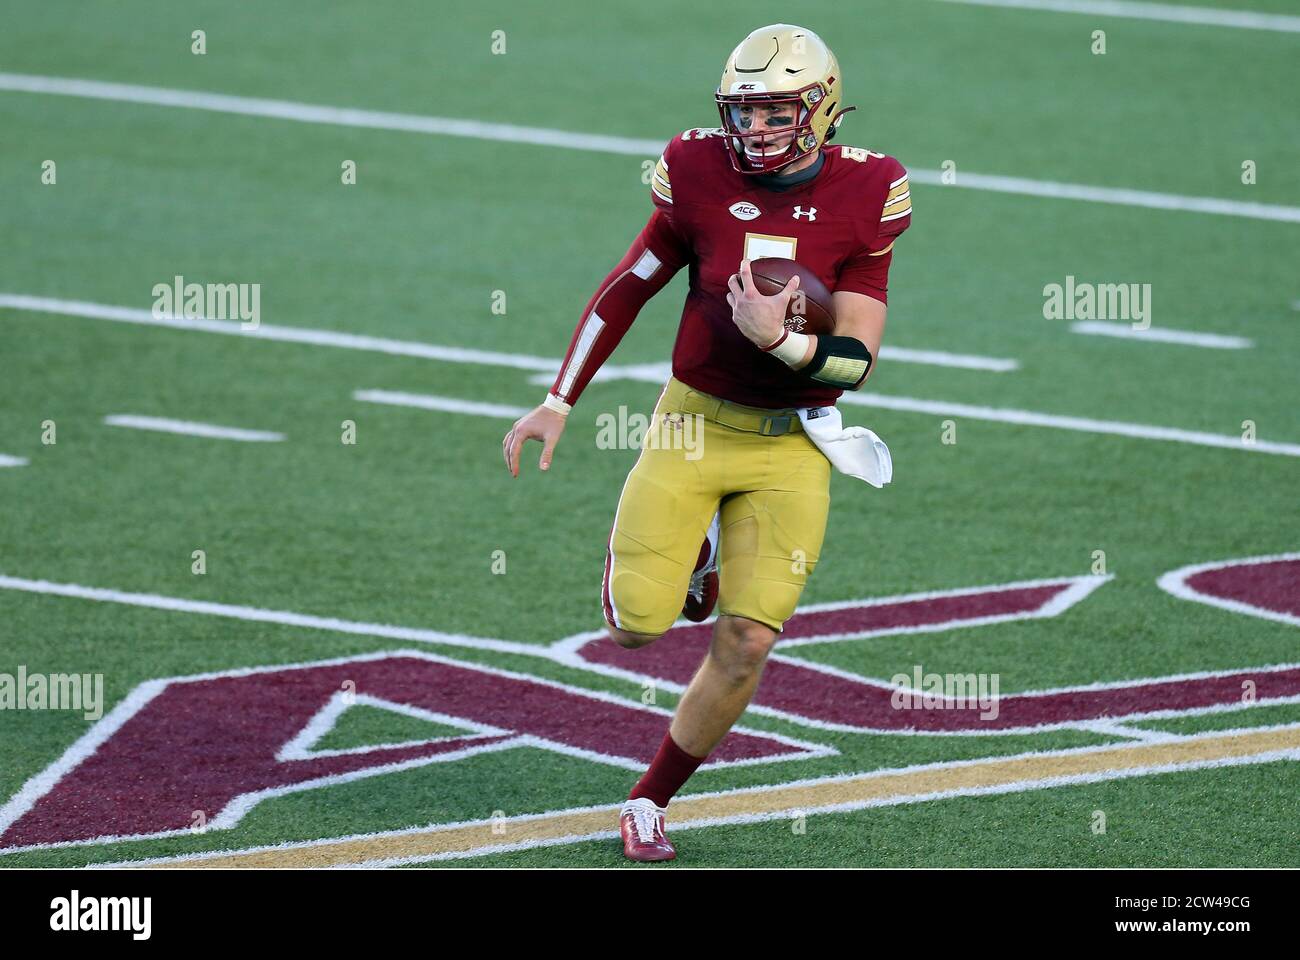 Alumni Stadium. 26th Sep, 2020. MA, USA; Boston College Eagles quarterback Phil Jurkovec (5) runs with the ball during the NCAA football game between Texas State Bobcats and Boston College Eagles at Alumni Stadium. Anthony Nesmith/CSM/Alamy Live News Stock Photo